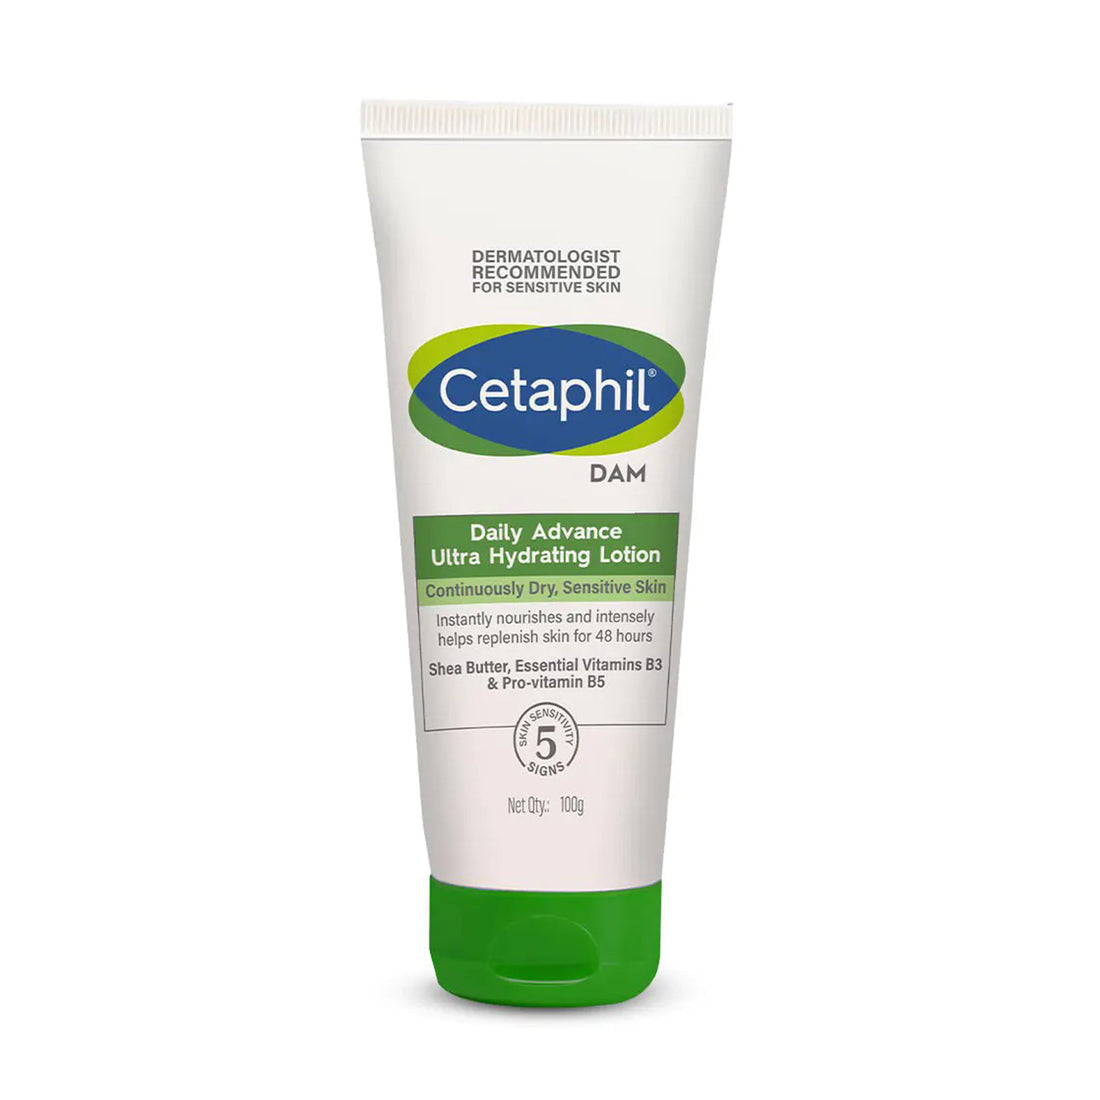 Cetaphil DAM Daily Advance Ultra Hydrating Lotion (100gm)